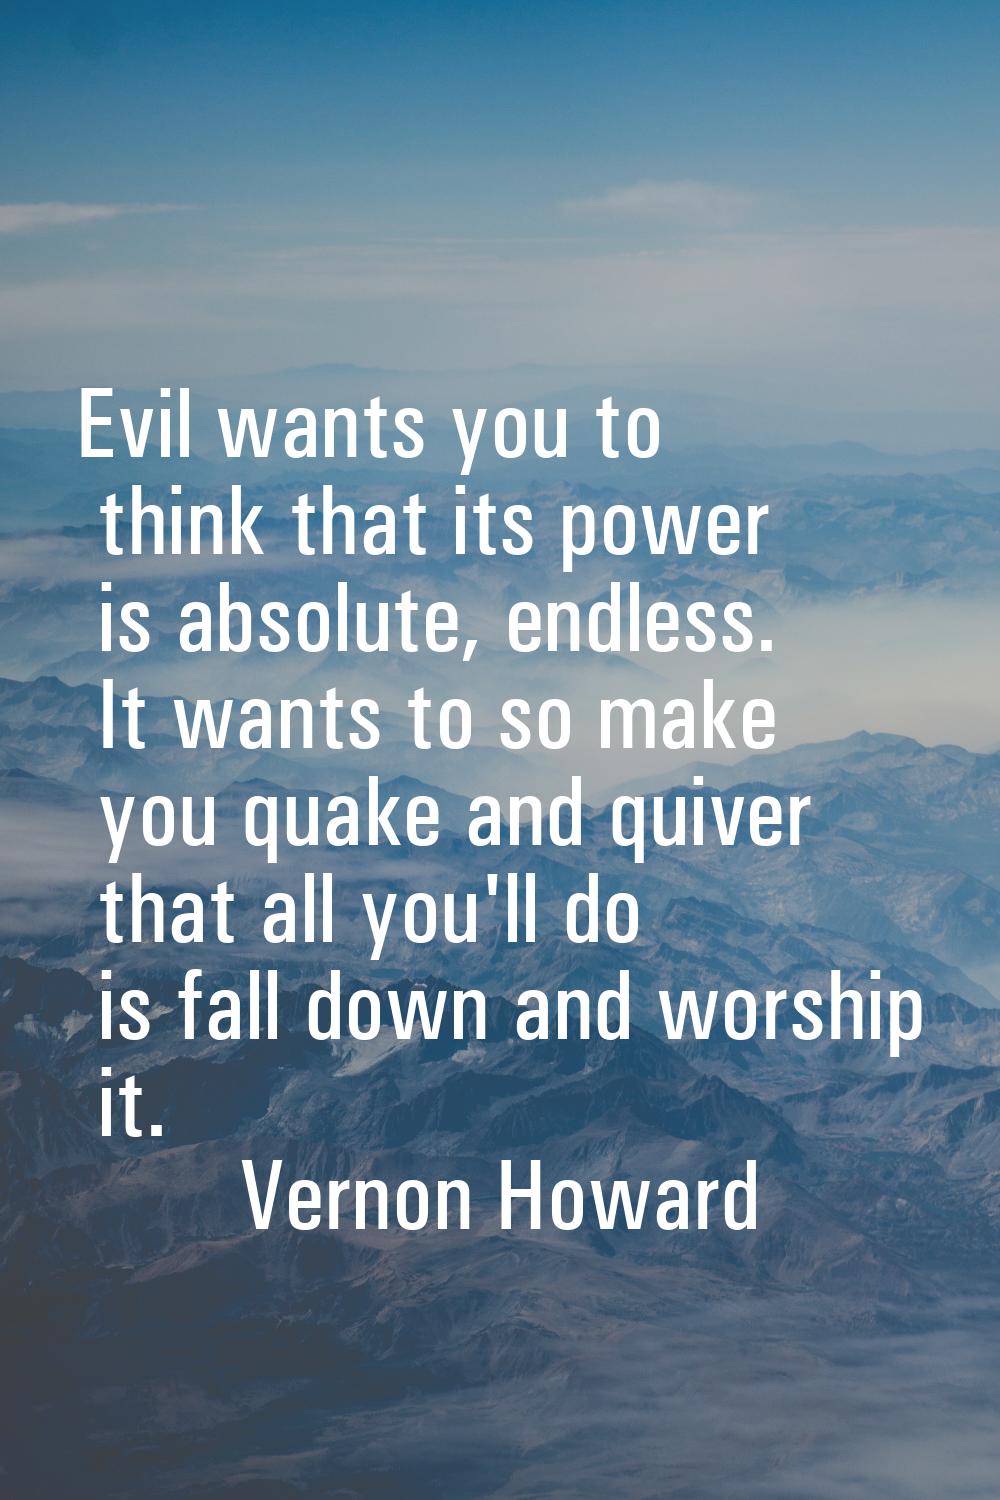 Evil wants you to think that its power is absolute, endless. It wants to so make you quake and quiv